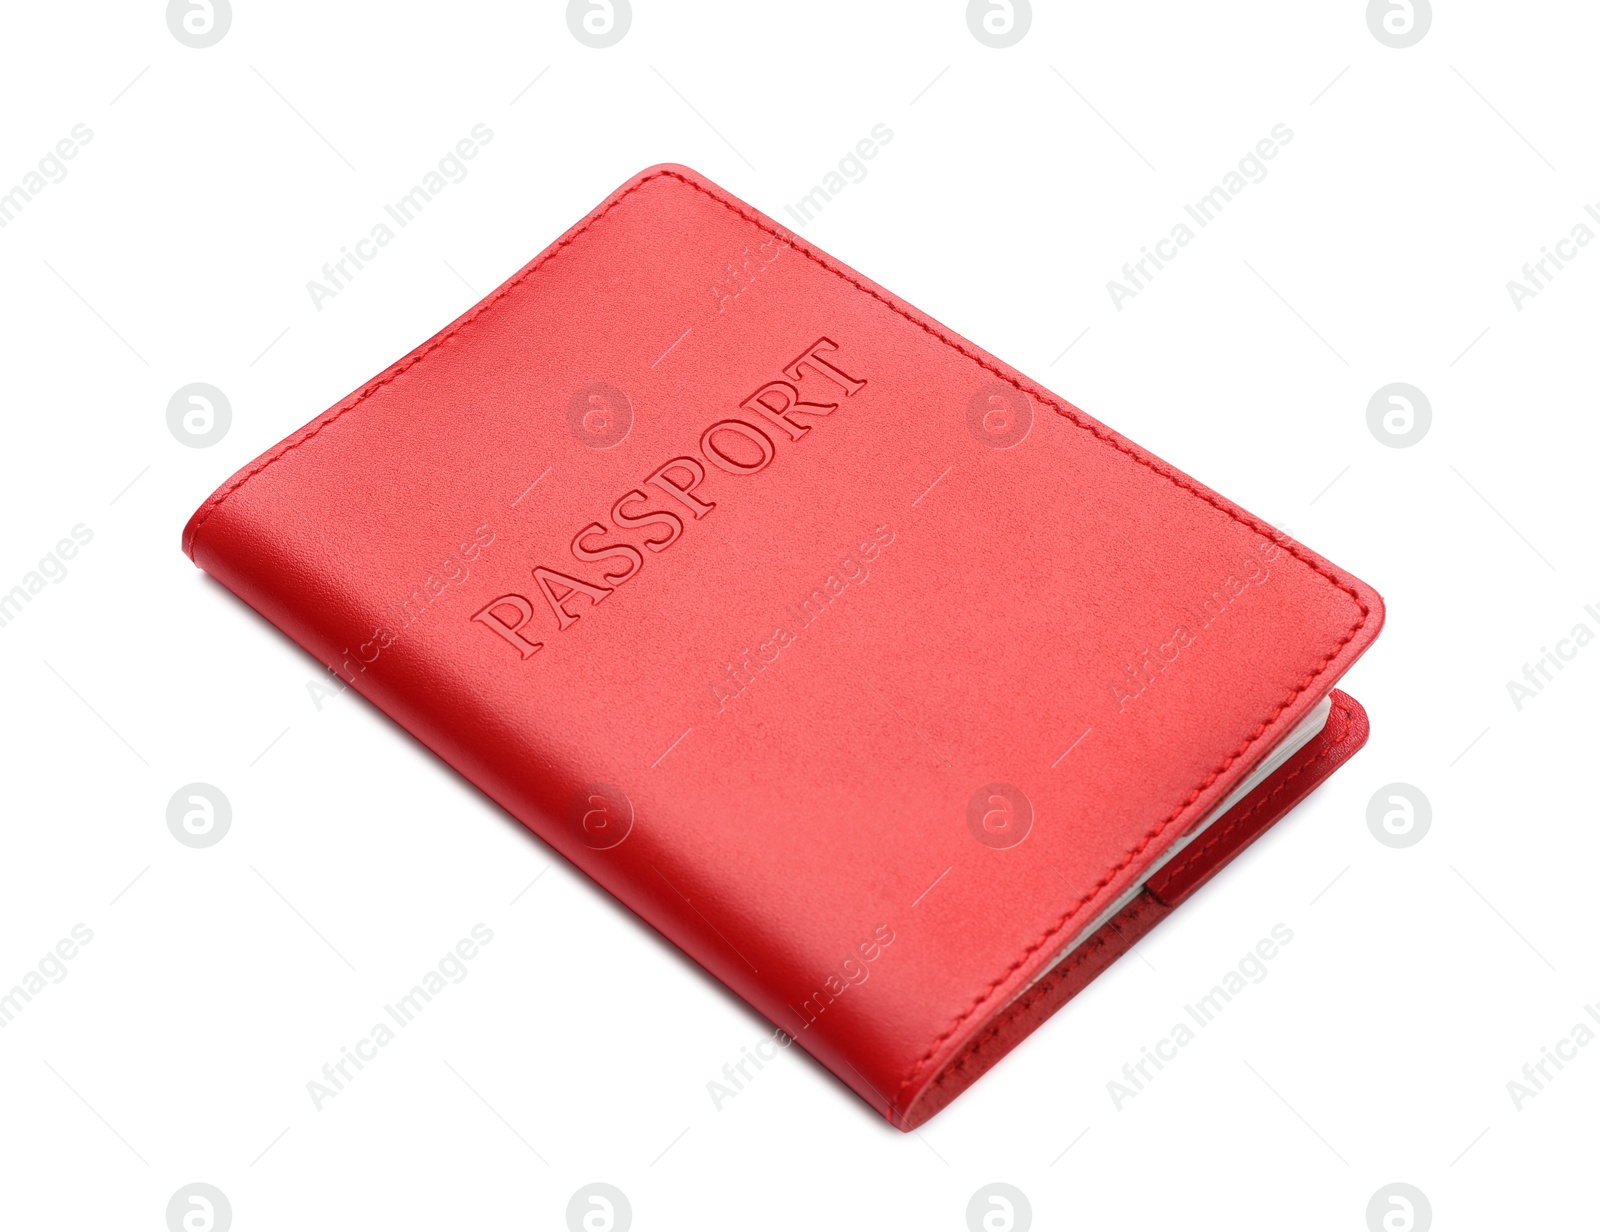 Photo of Passport in red leather case isolated on white